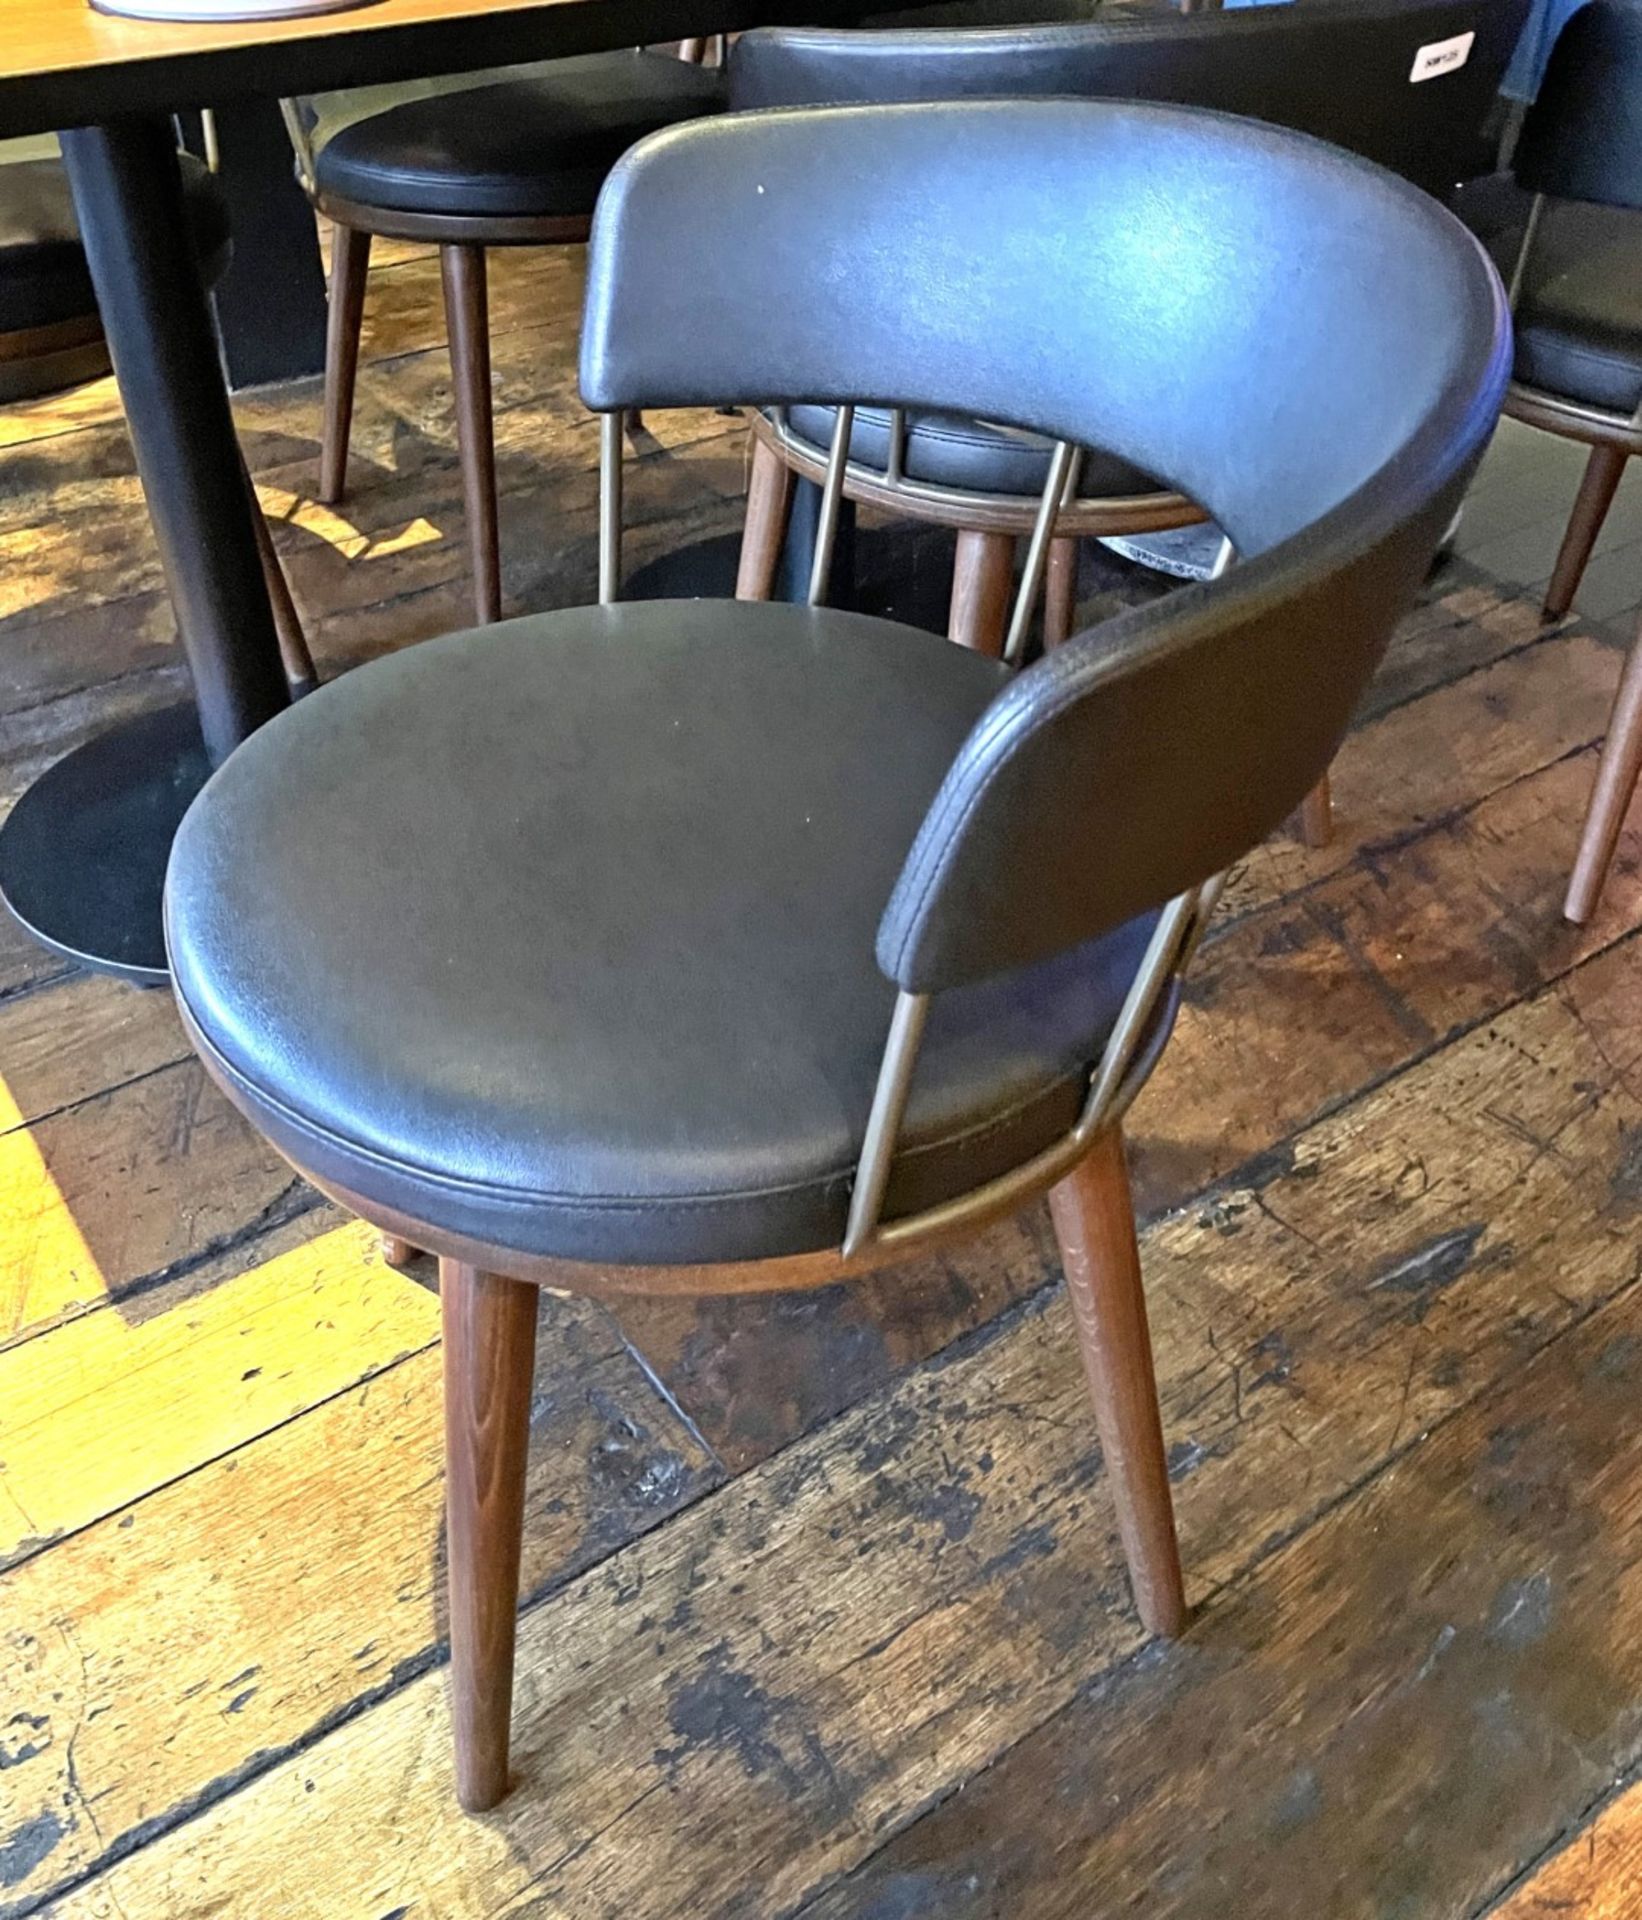 2 x PARLA 'Meru' Casual Dining Chairs Featuring a Powder Coated Metal Structure & Solid Beech Legs - Image 2 of 14